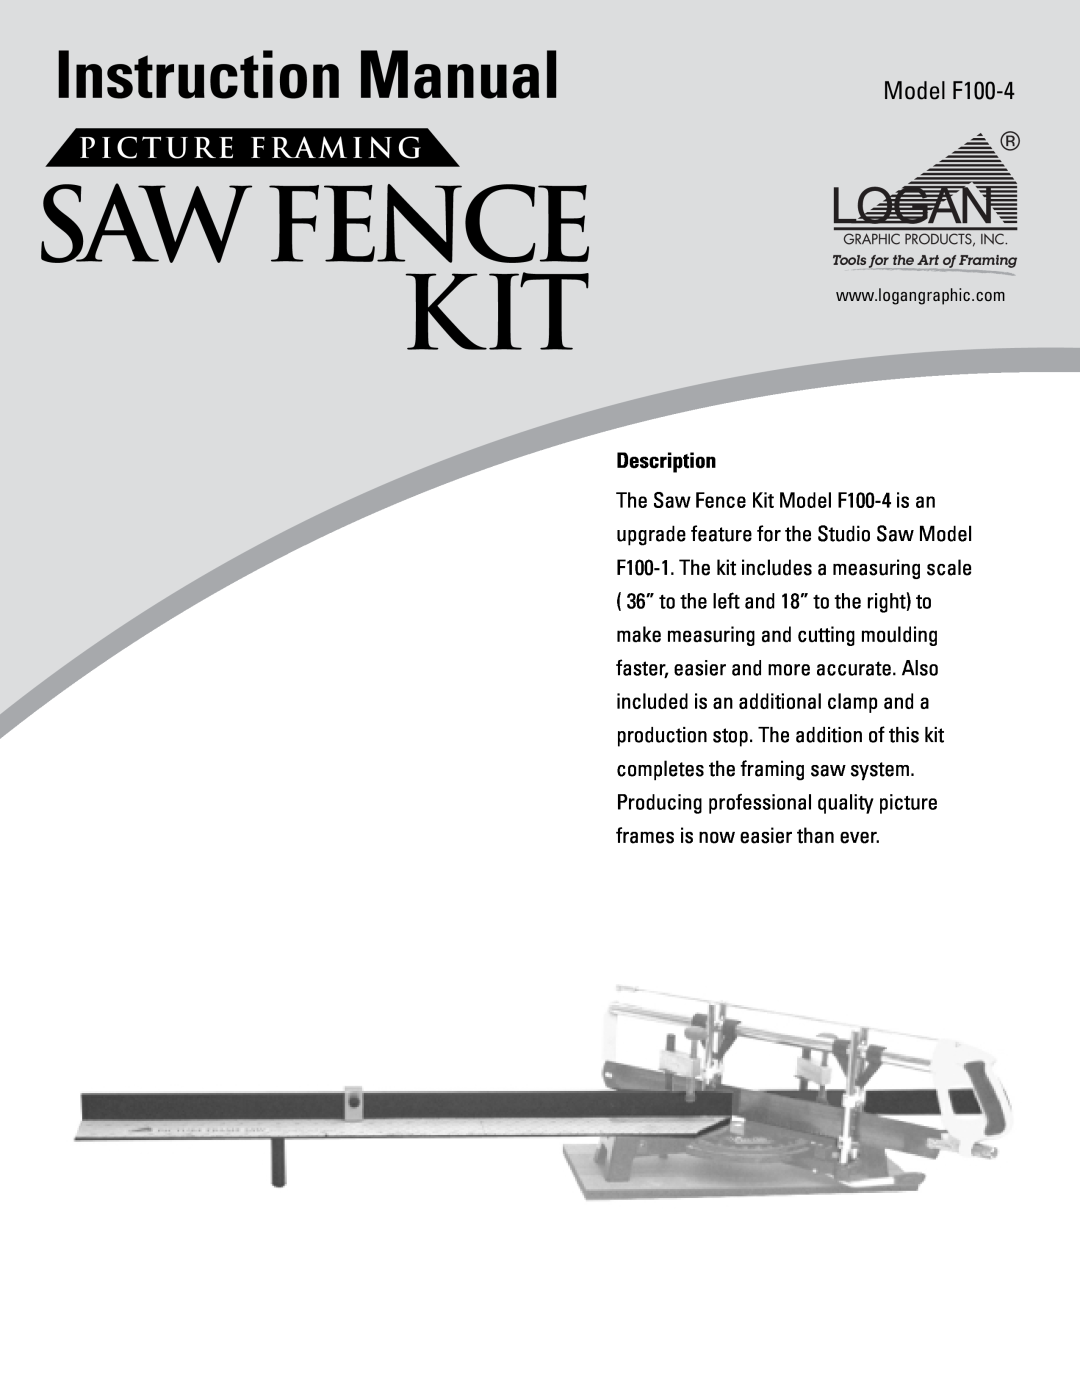 Logan Graphic Products instruction manual Description, Saw Fence Kit, P I C T U R E F R A M I N G, Model F100-4 